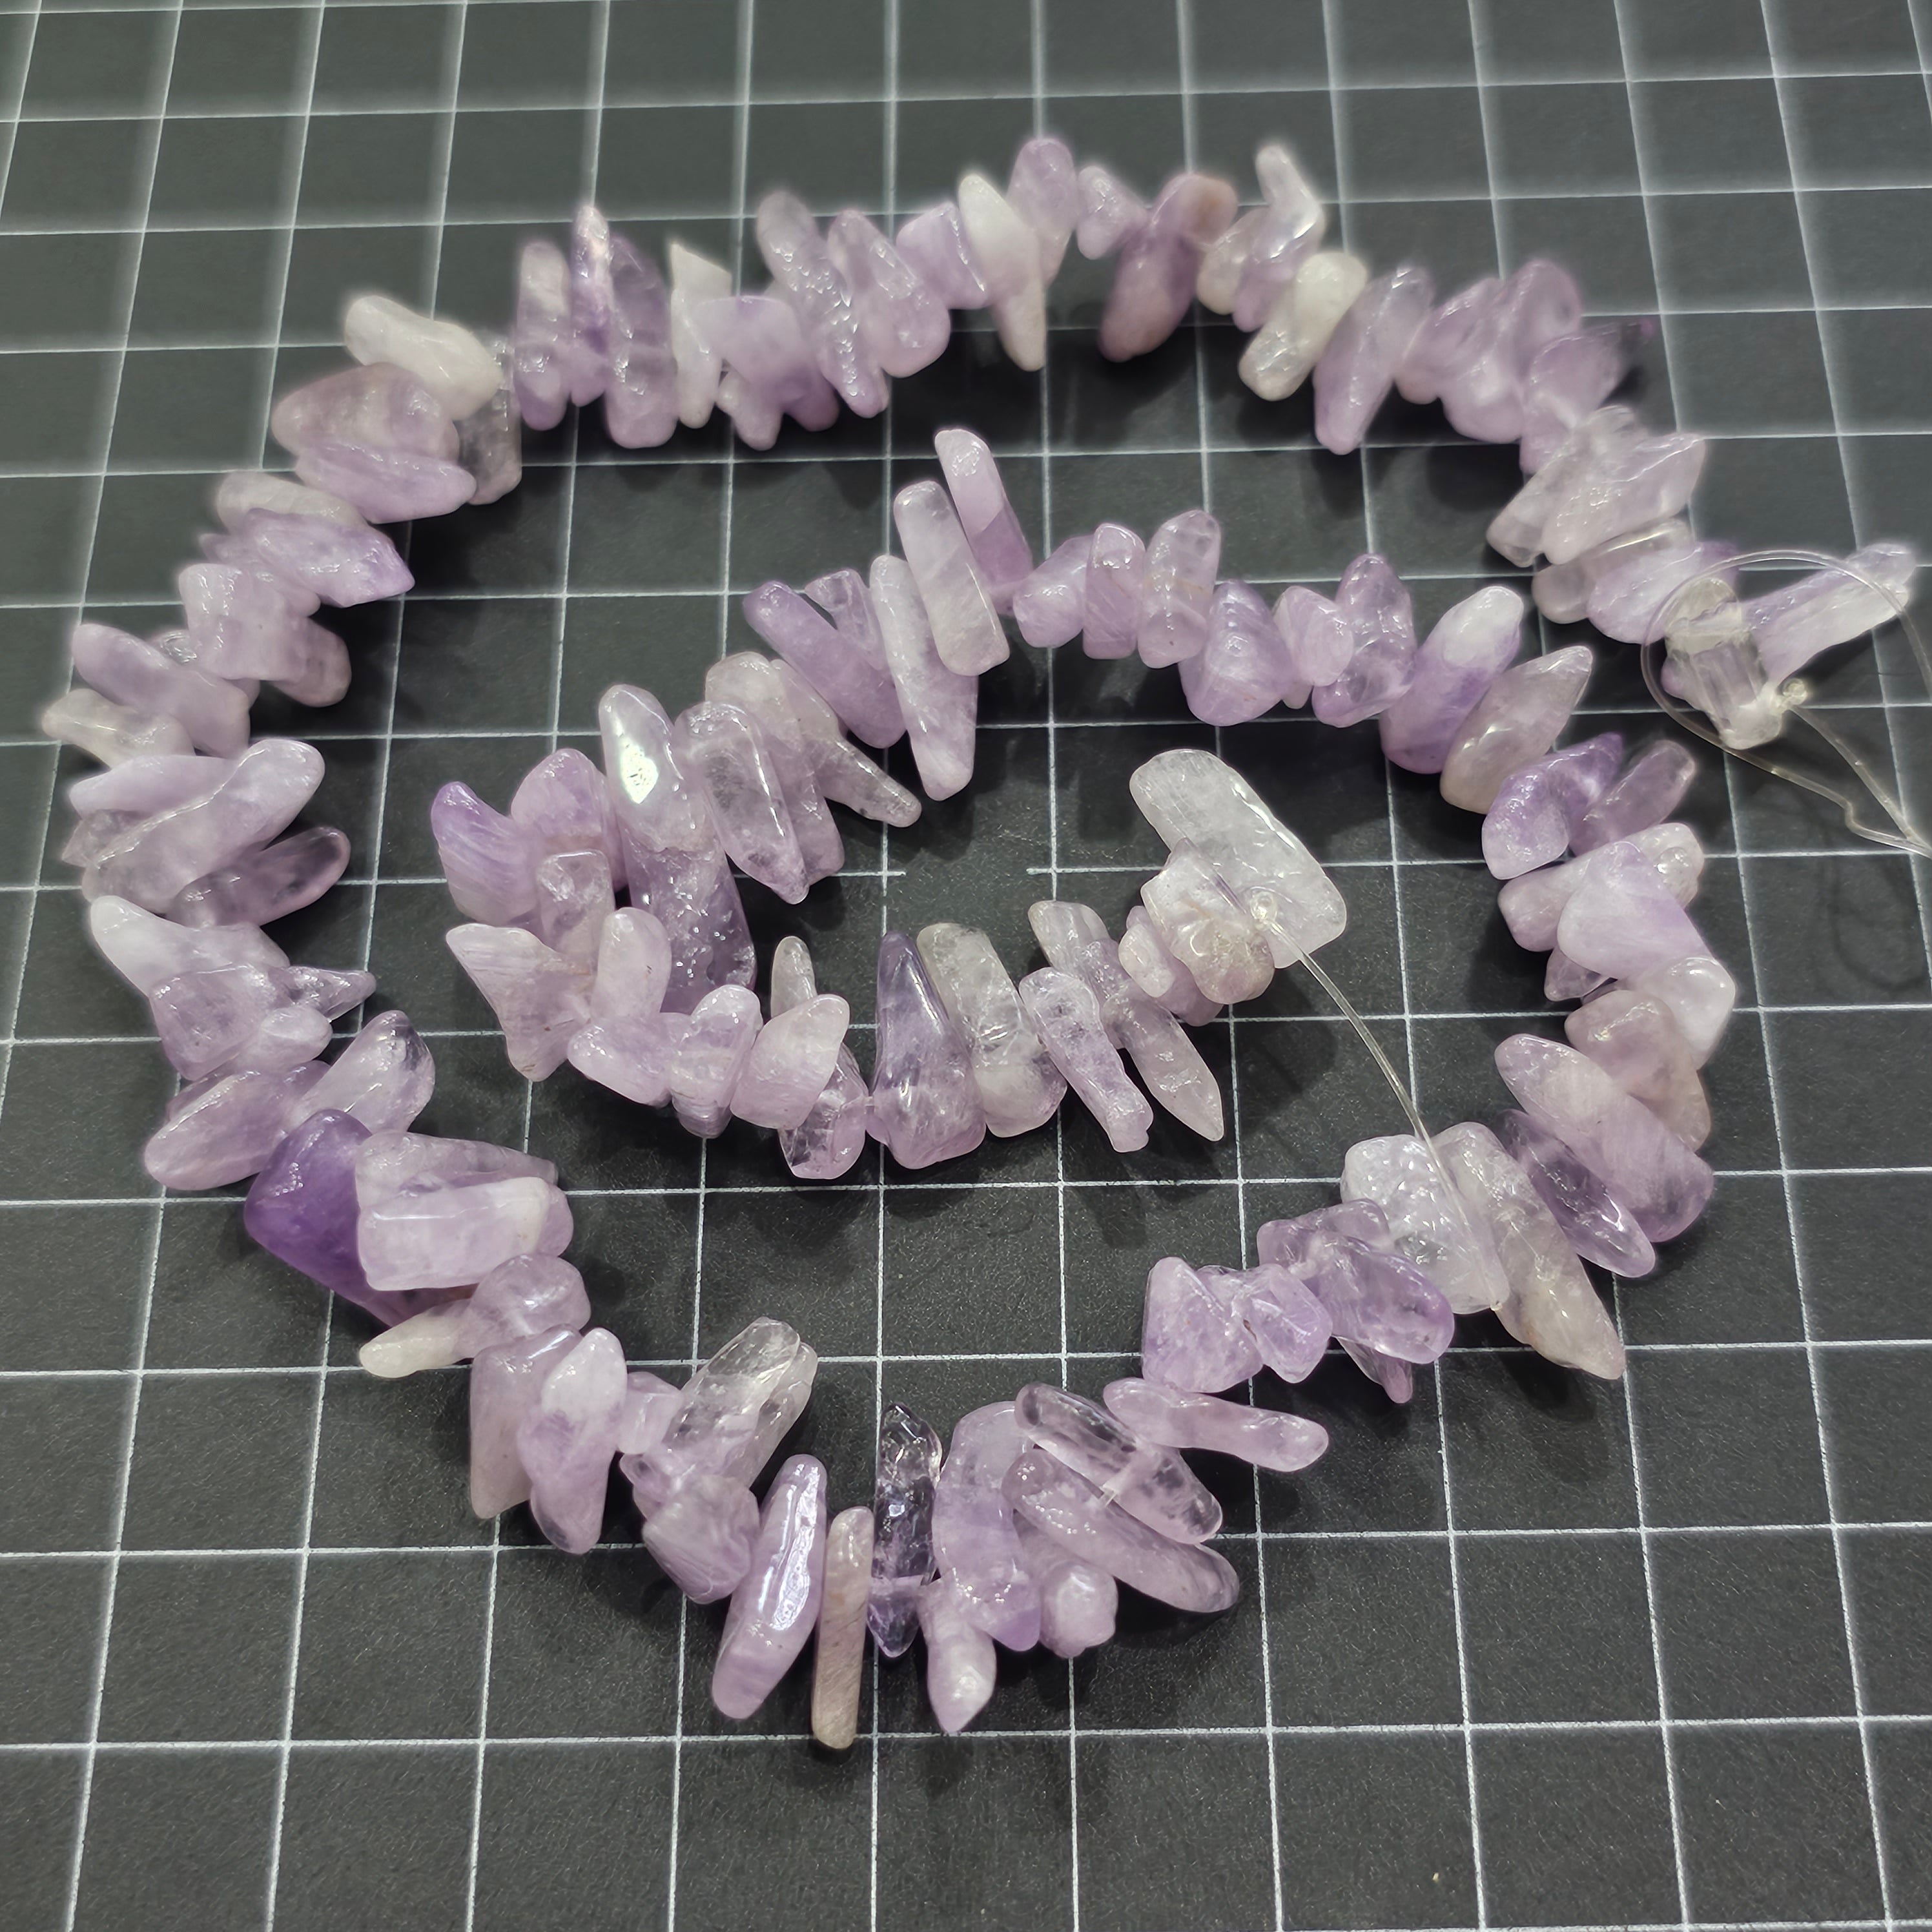 15 Inches Of 1 Line Natural Pink Amethyst Gemstone Fancy Beads Size: 10-16mm - The LabradoriteKing